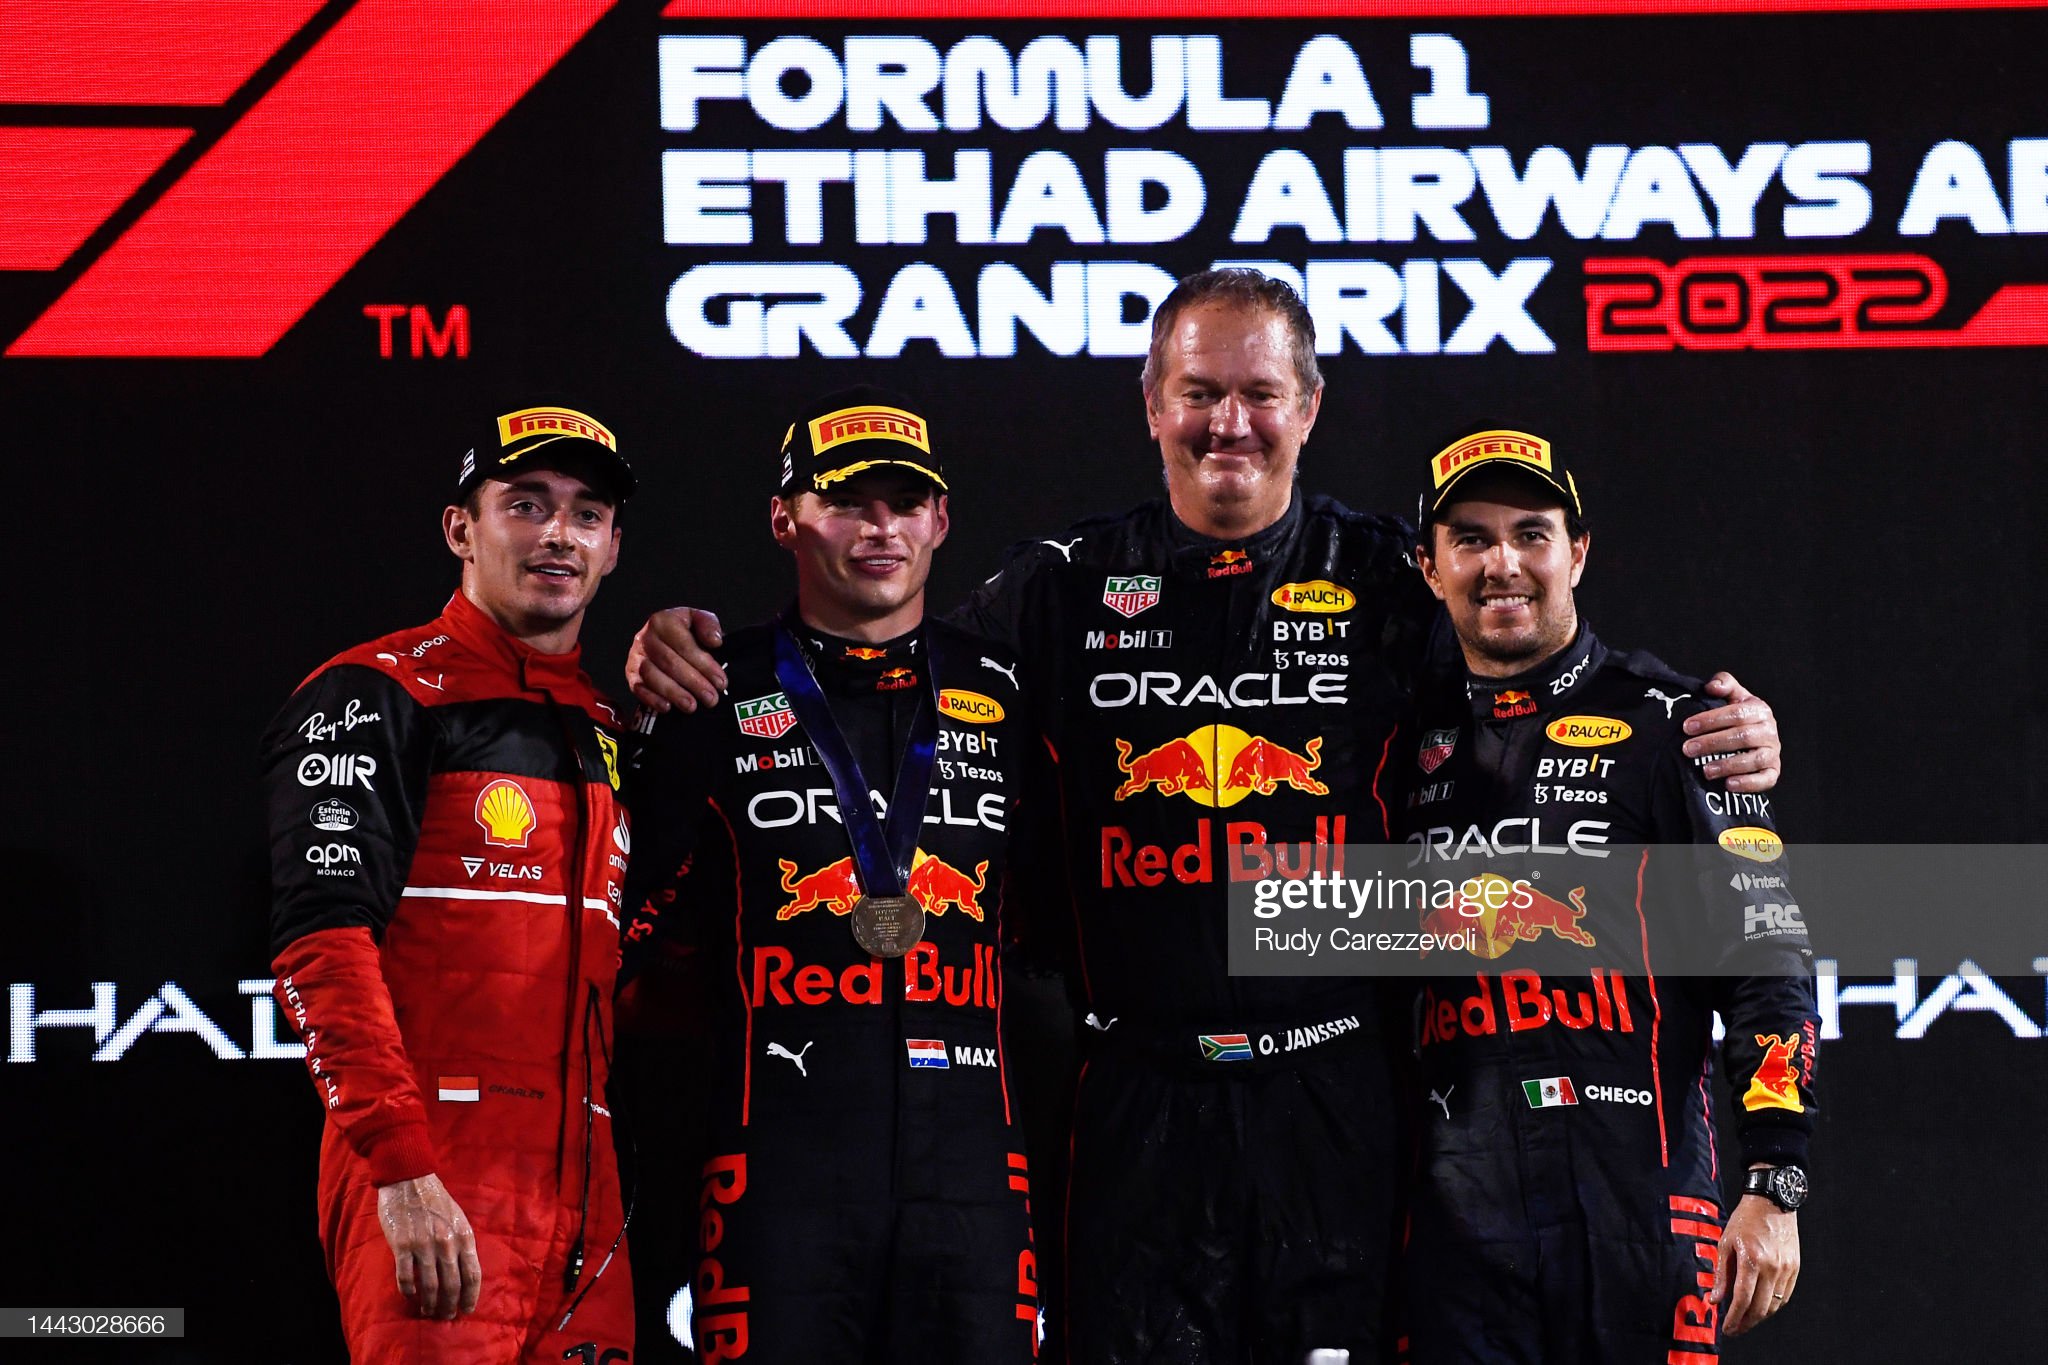 Race winner Max Verstappen of the Netherlands and Red Bull Racing, second placed Charles Leclerc of Monaco and Ferrari, Olaf Janssen, Red Bull Racing Team Member and third placed Sergio Perez of Mexico and Red Bull Racing celebrate on the podium.